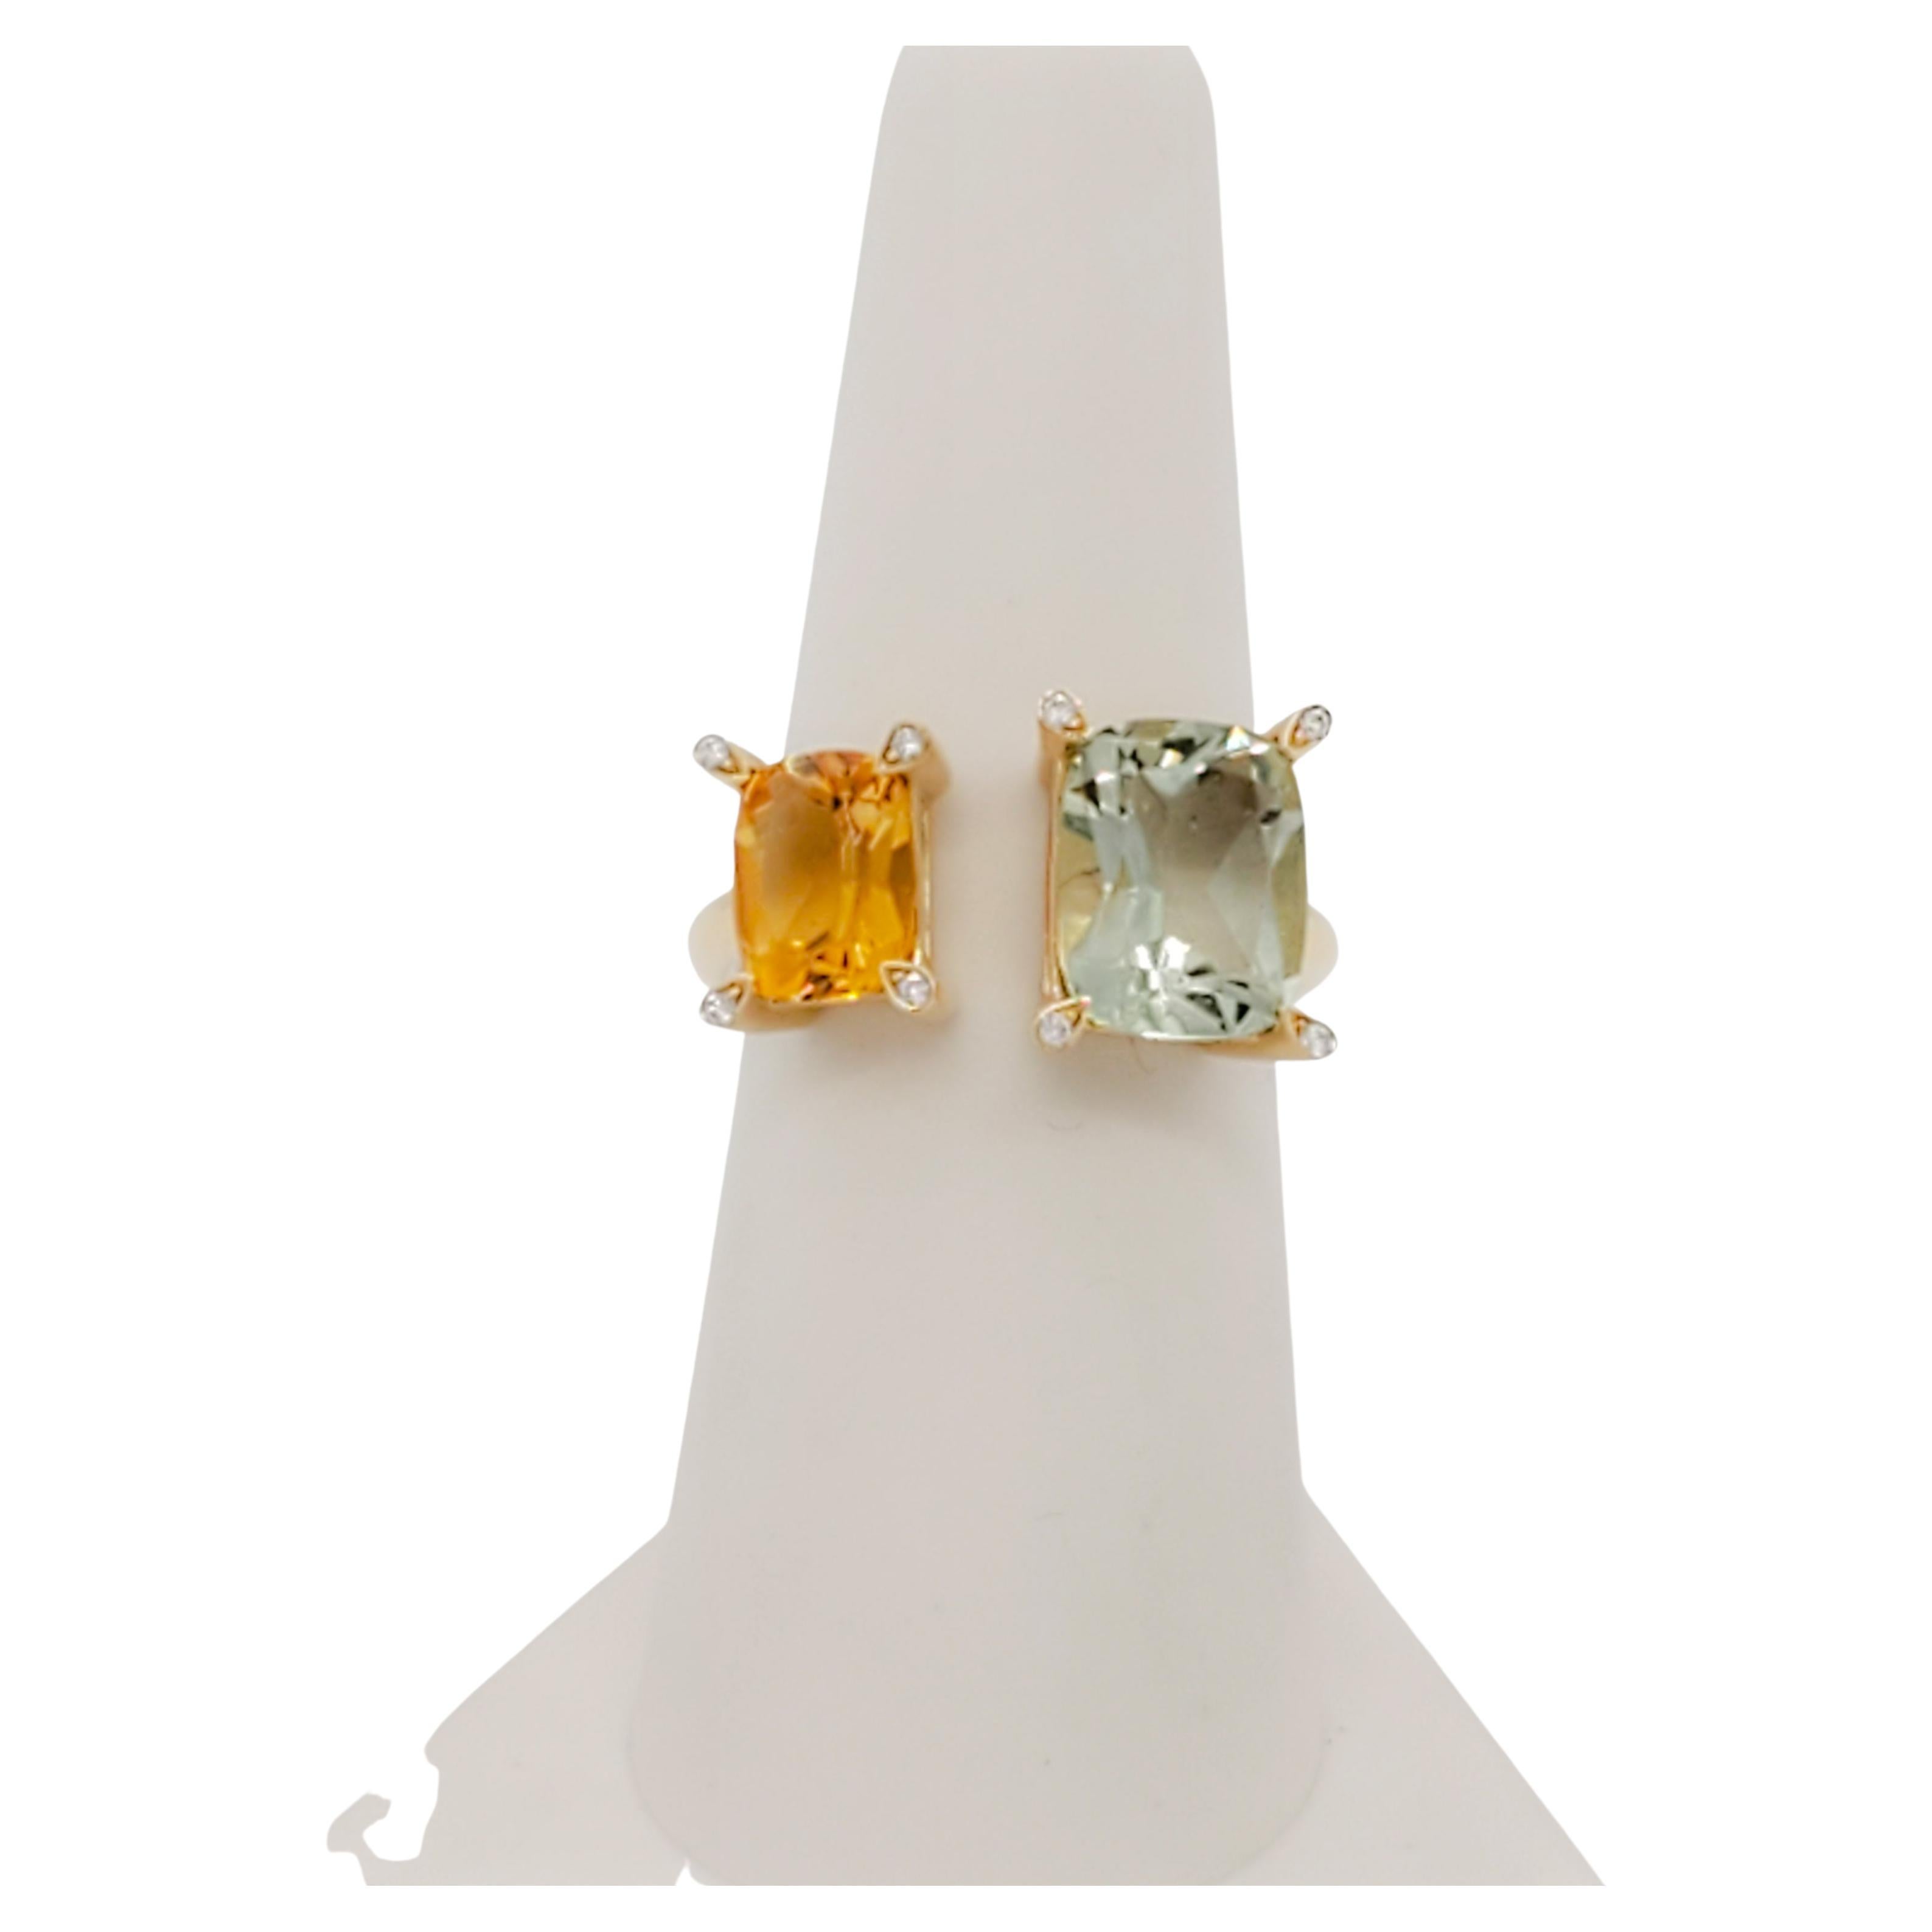  Green Amethyst, Citrine, and Diamond Cocktail Ring in 14k Yellow Gold